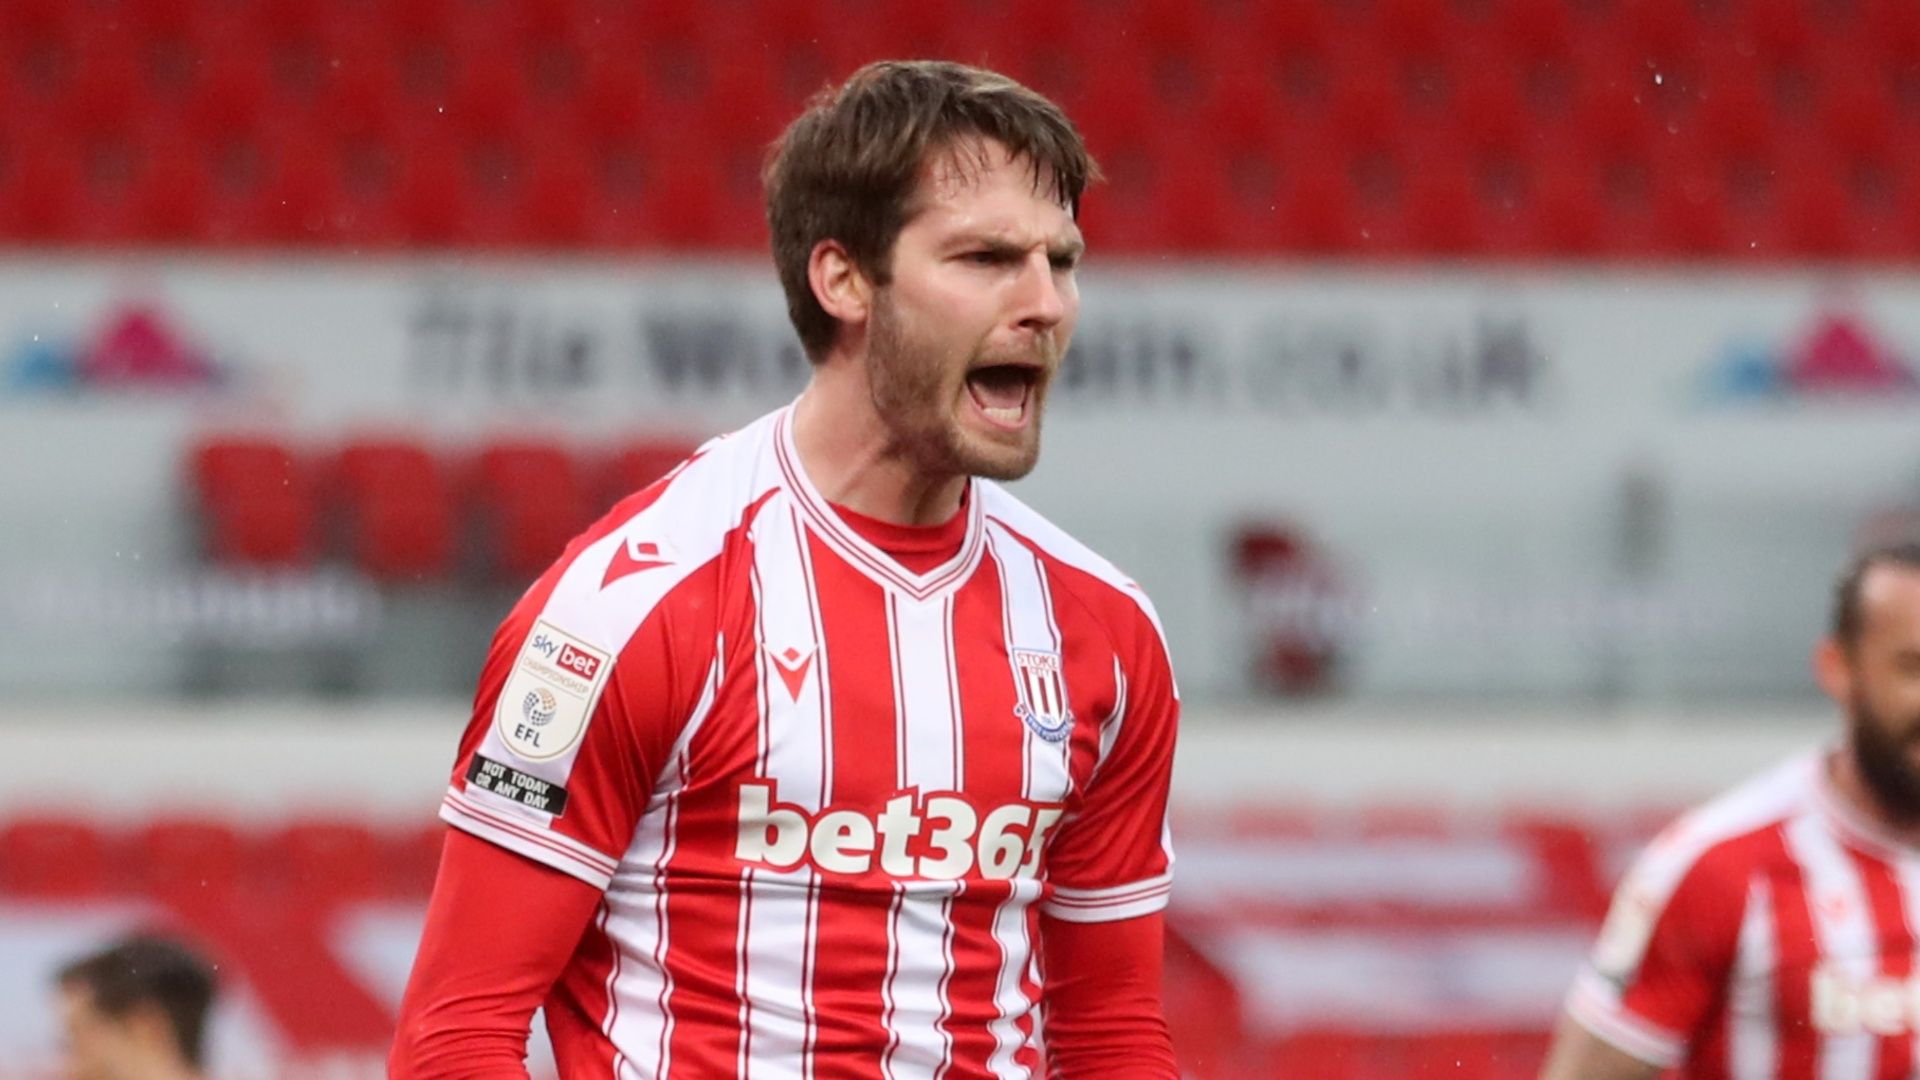 Nick Powell has signed for Stockport County in a superb signing for League Two